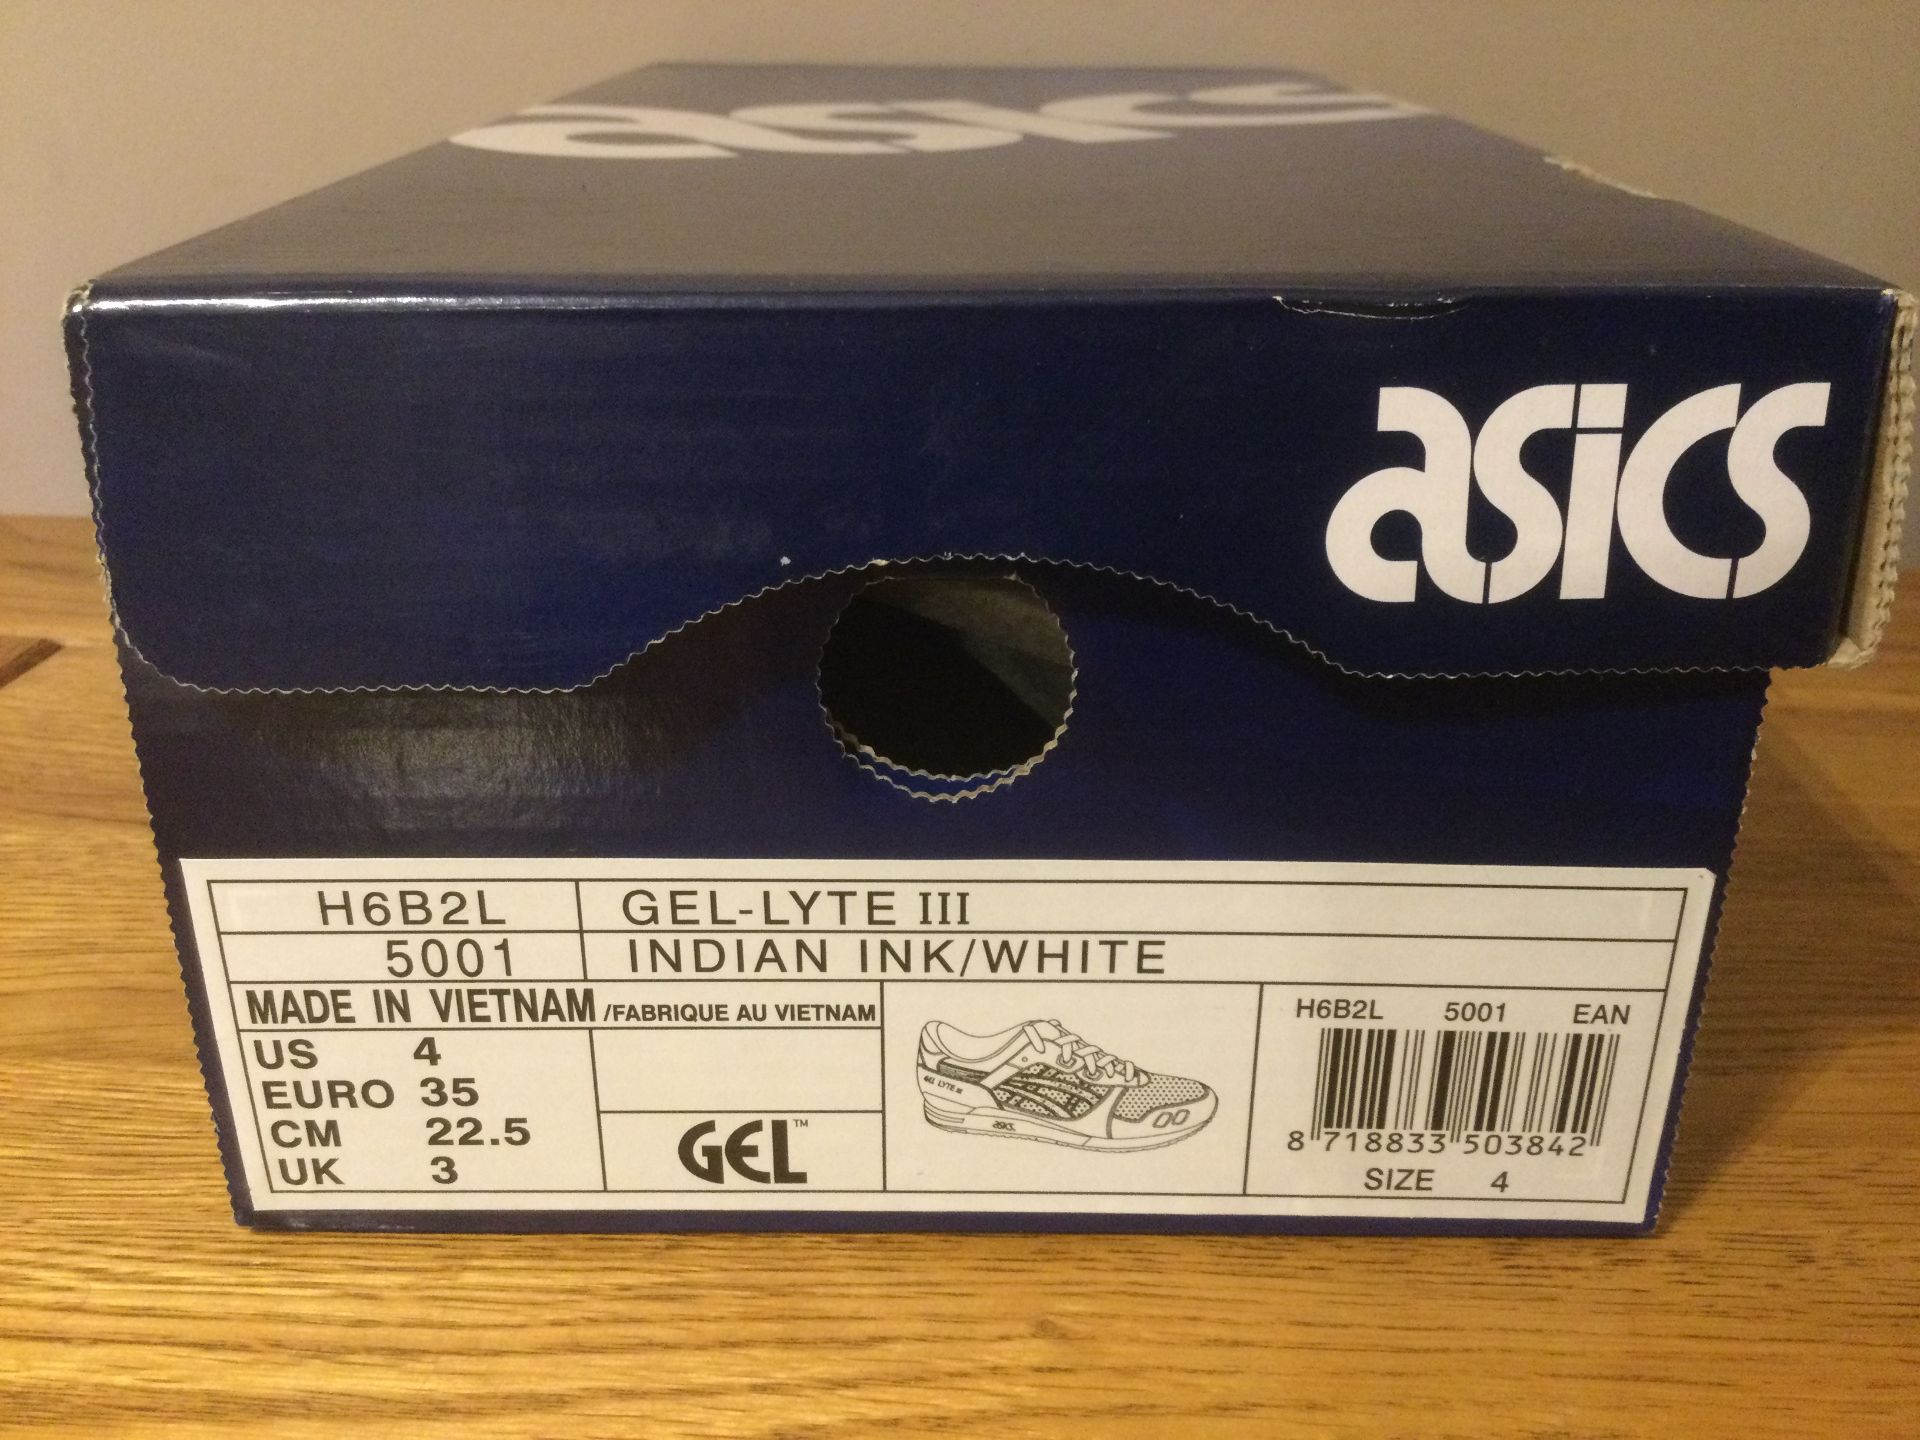 ASICS Gel-Lyte III, Ladies Trainers, Indian Ink, Size 3 - New RRP £95.00 - Image 7 of 7